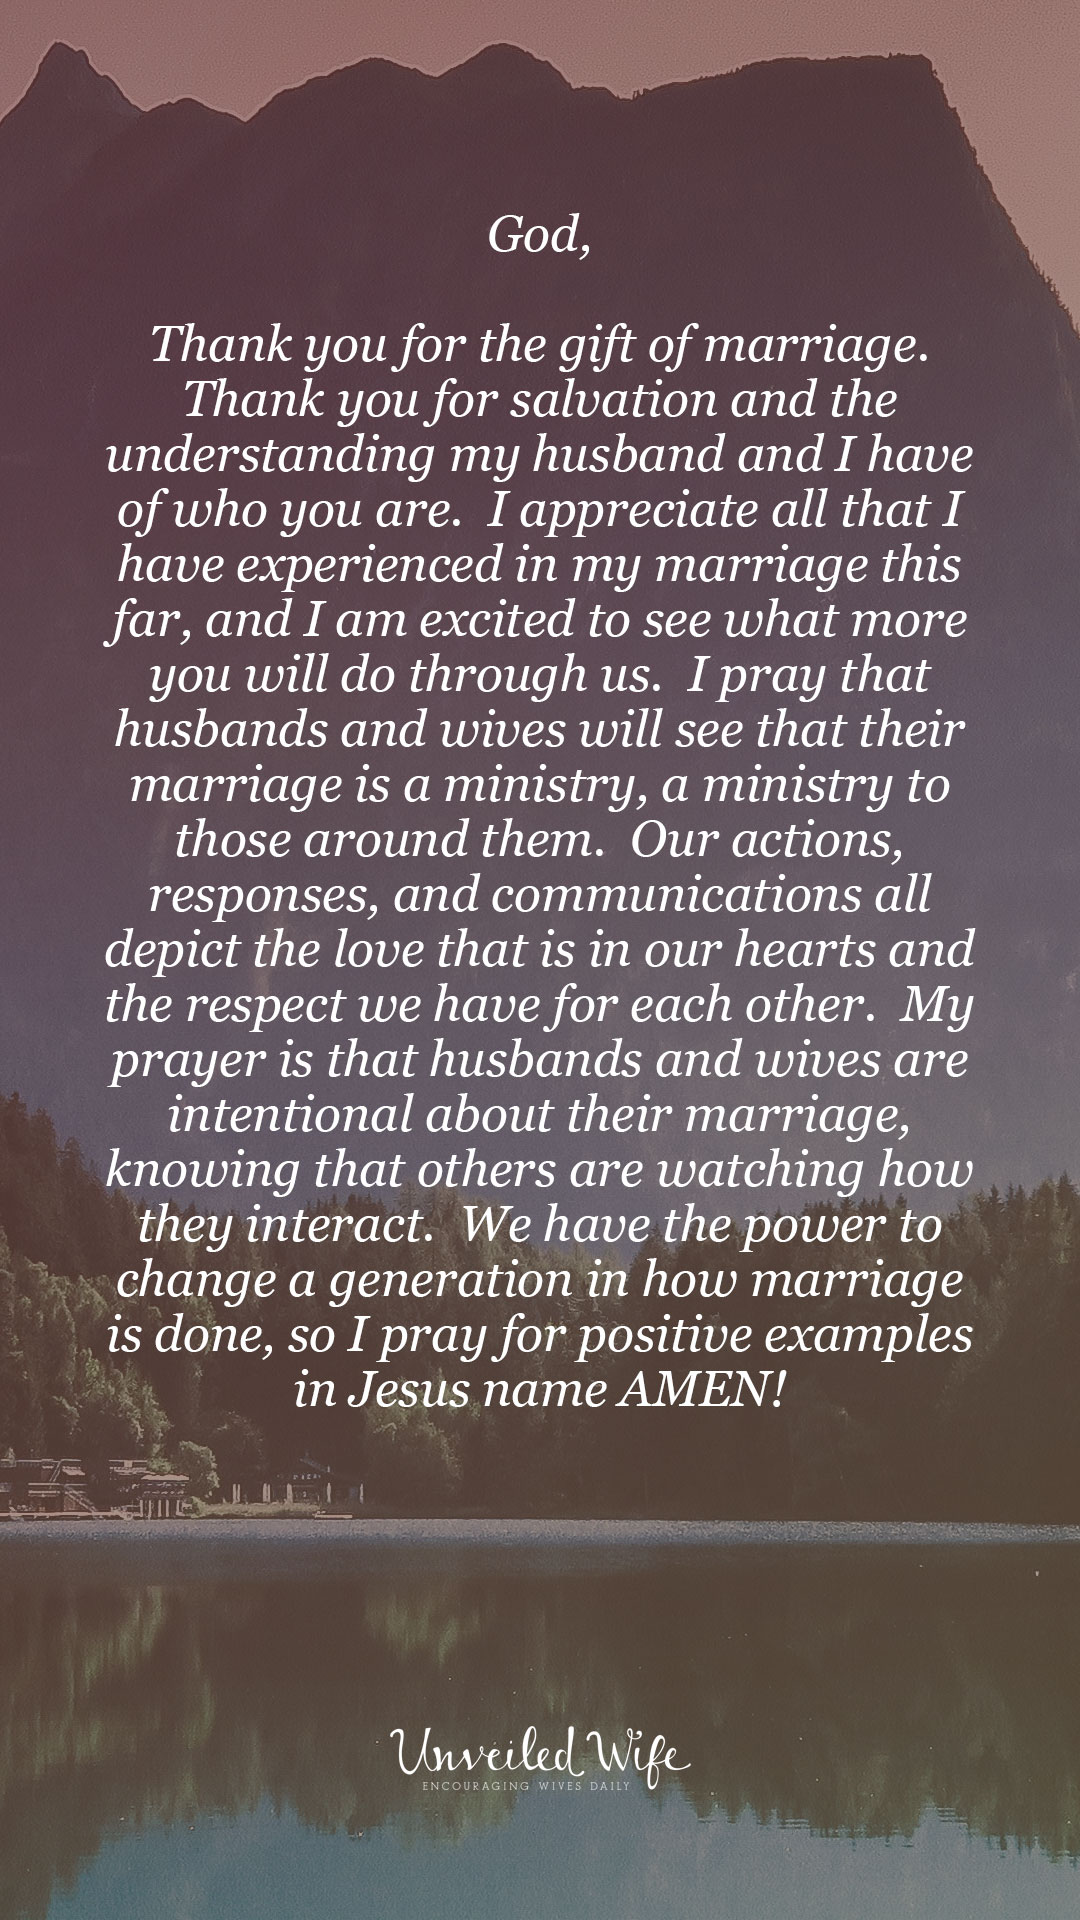 Prayer Of The Day - Marriage Is A Ministry